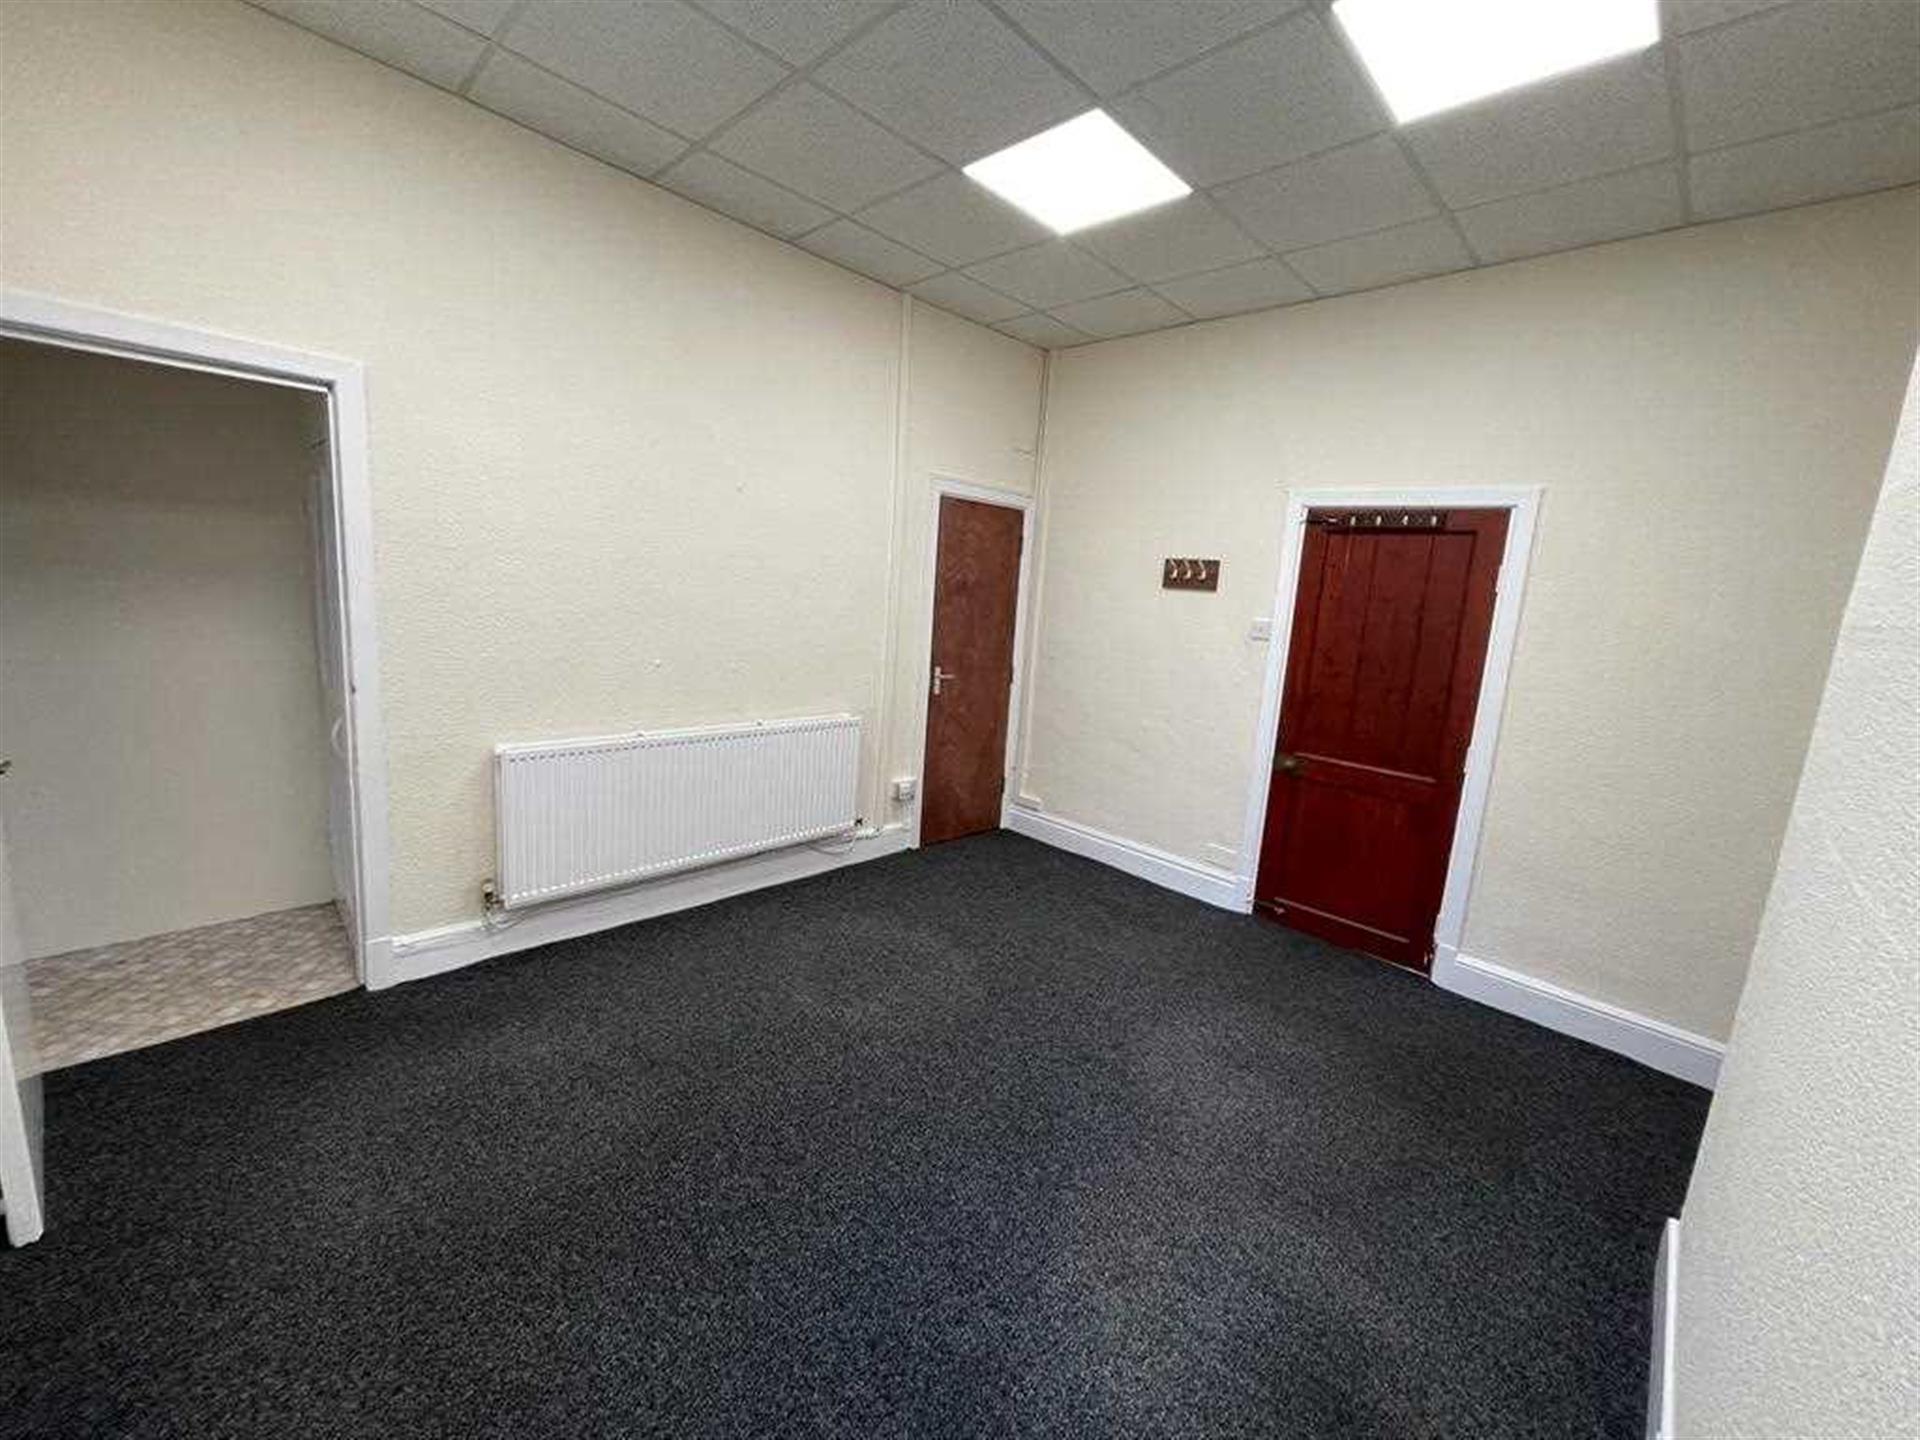 Commercial Property To Rent - Image 2